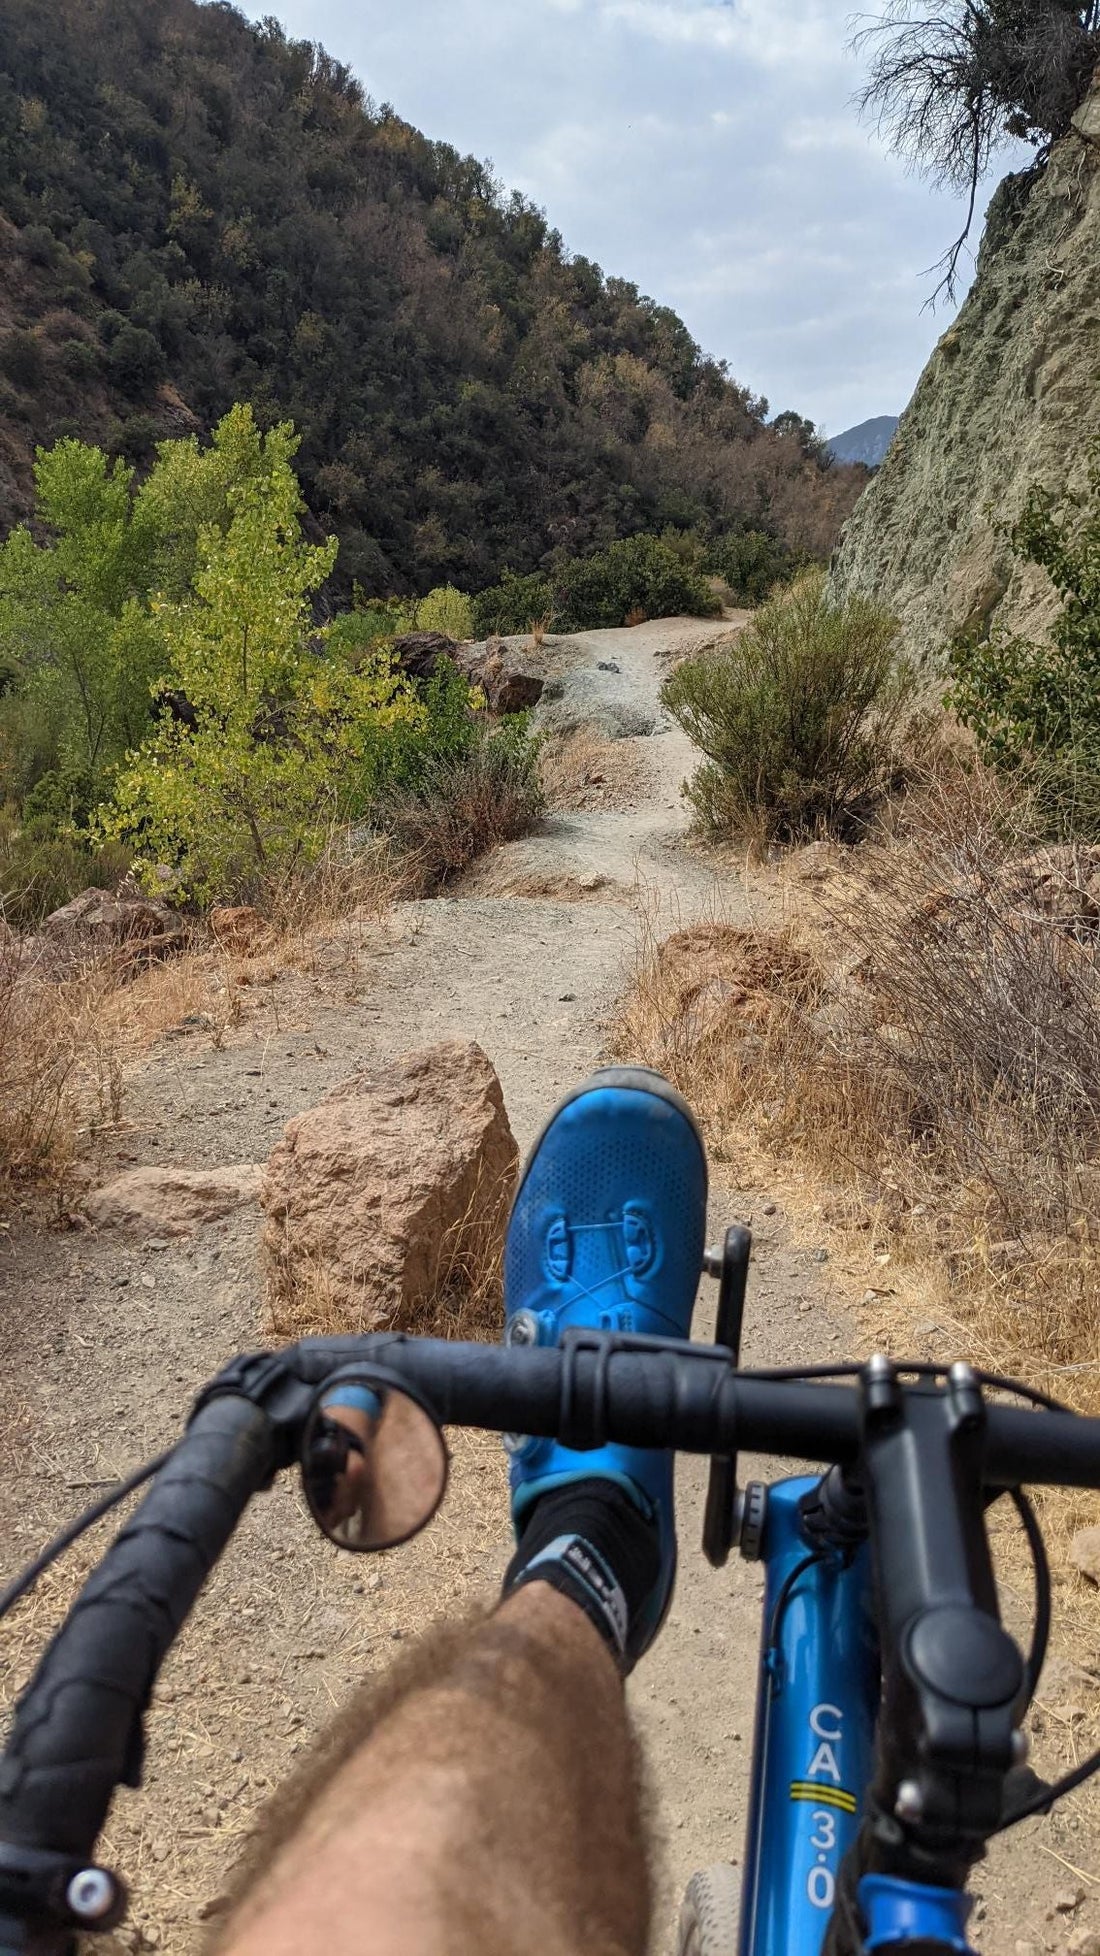 Riding the trail.